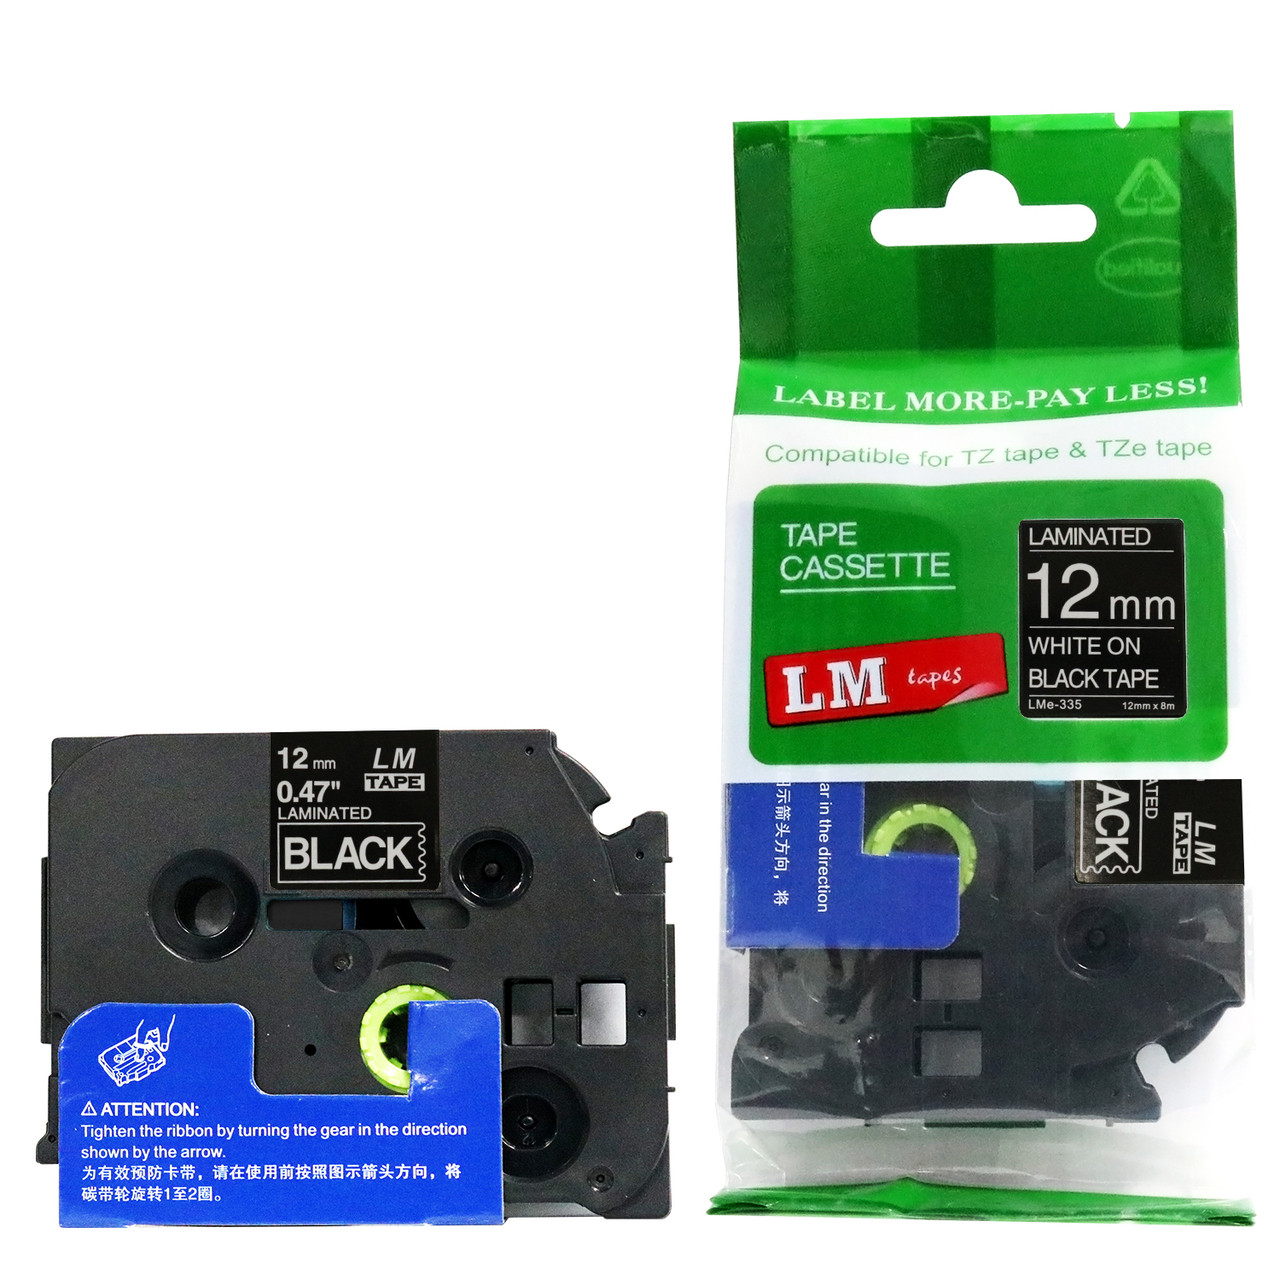 1*Label Tape For Brother Printer 12mm White On Black TZ TZe-335 P-Touch PT-1830